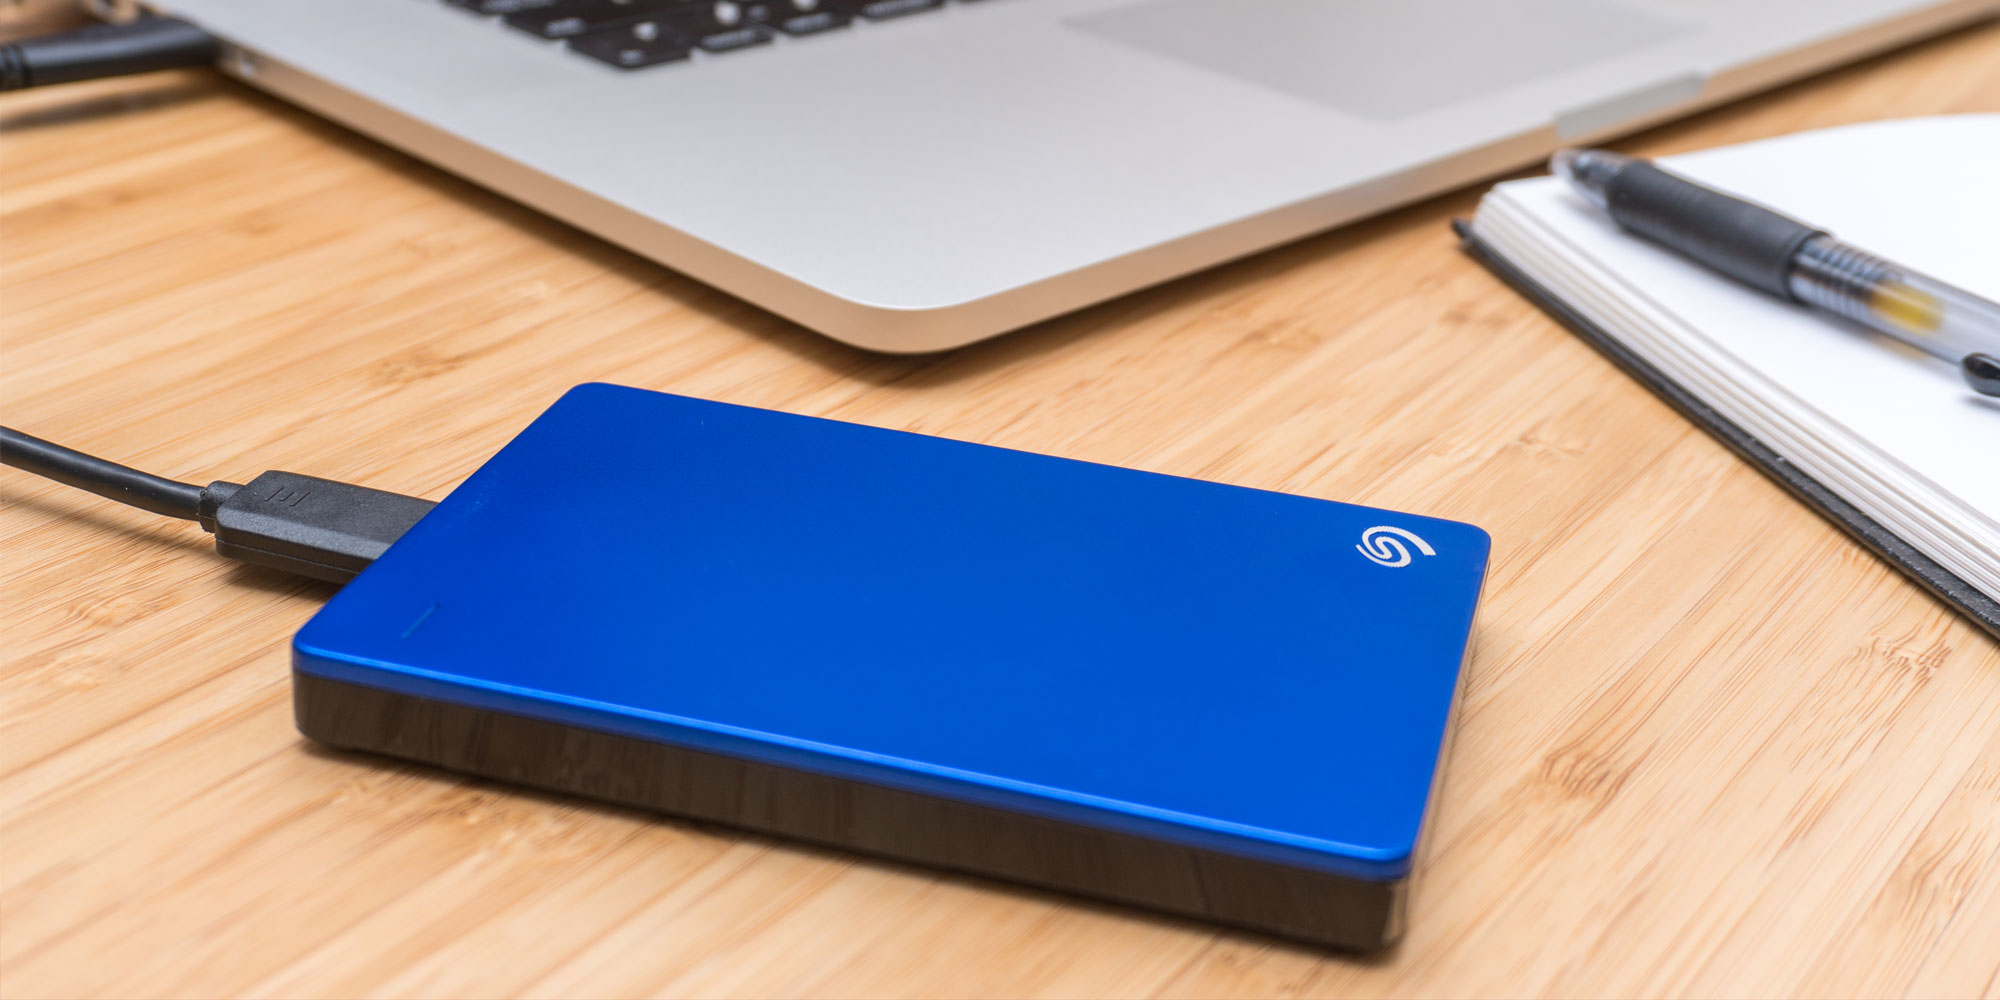 What Is The Best Portable External Hard Drive For Pc Falassteam